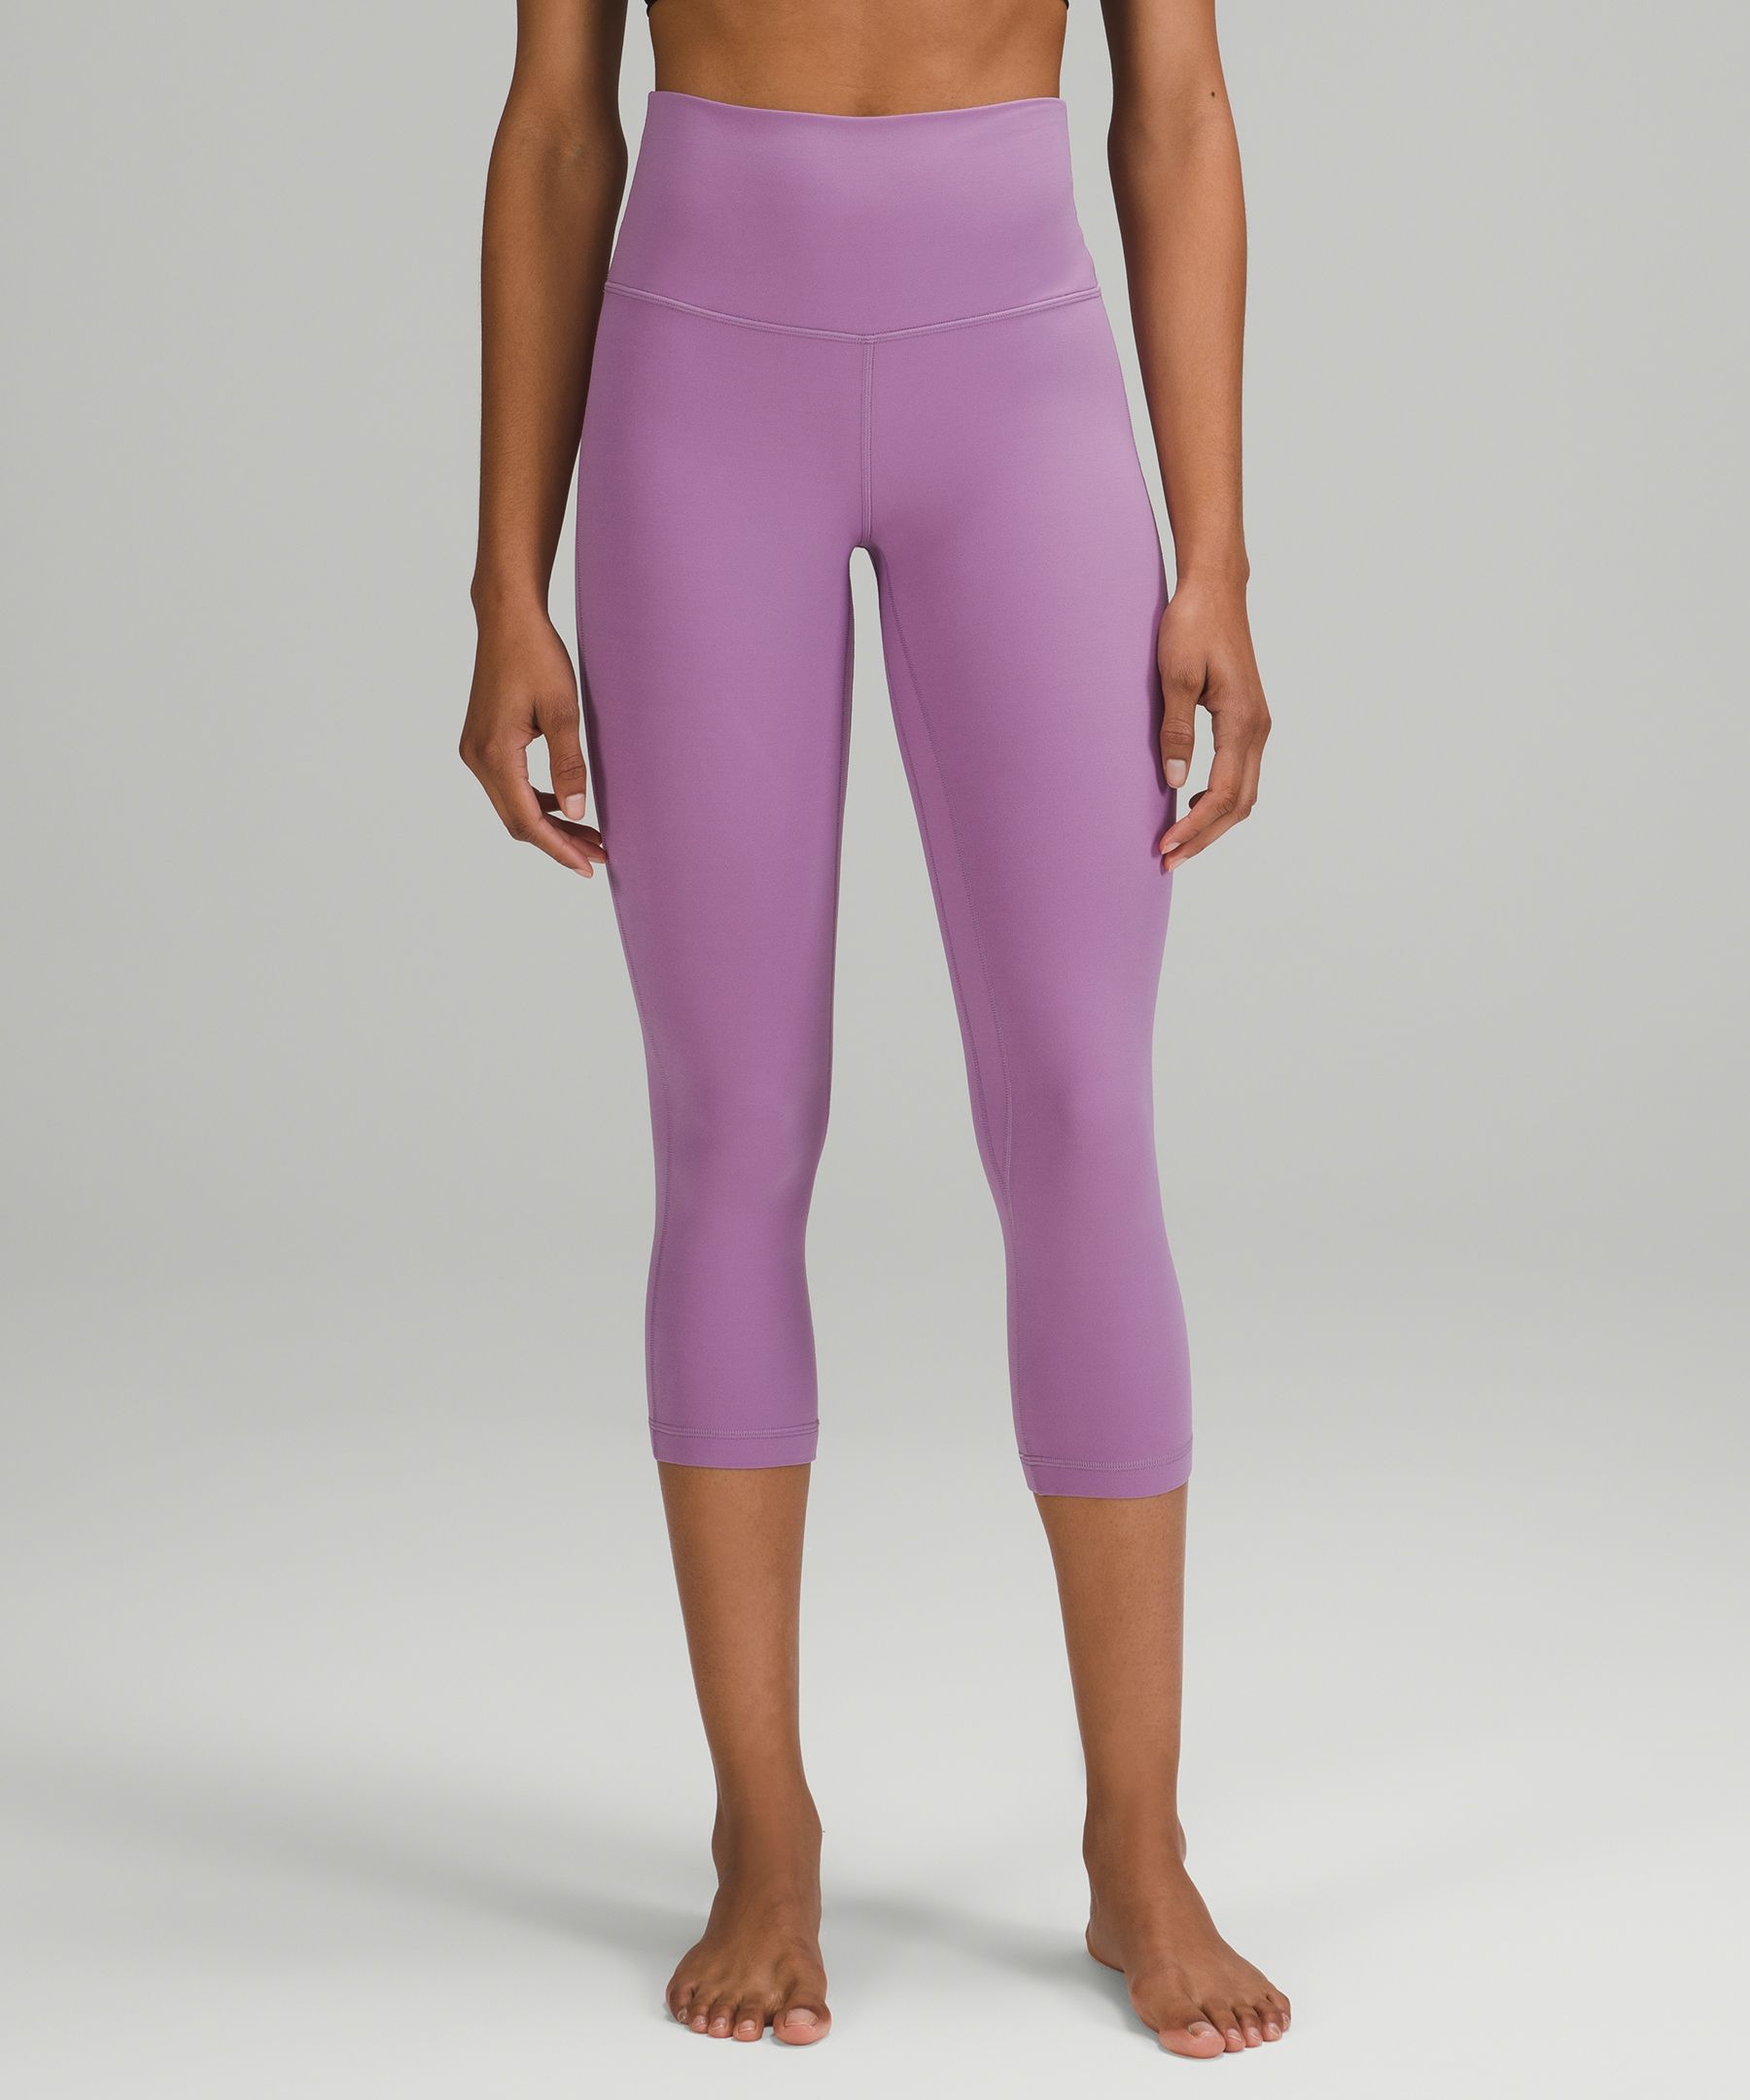 Geometric high-rise leggings in pink - Live The Process